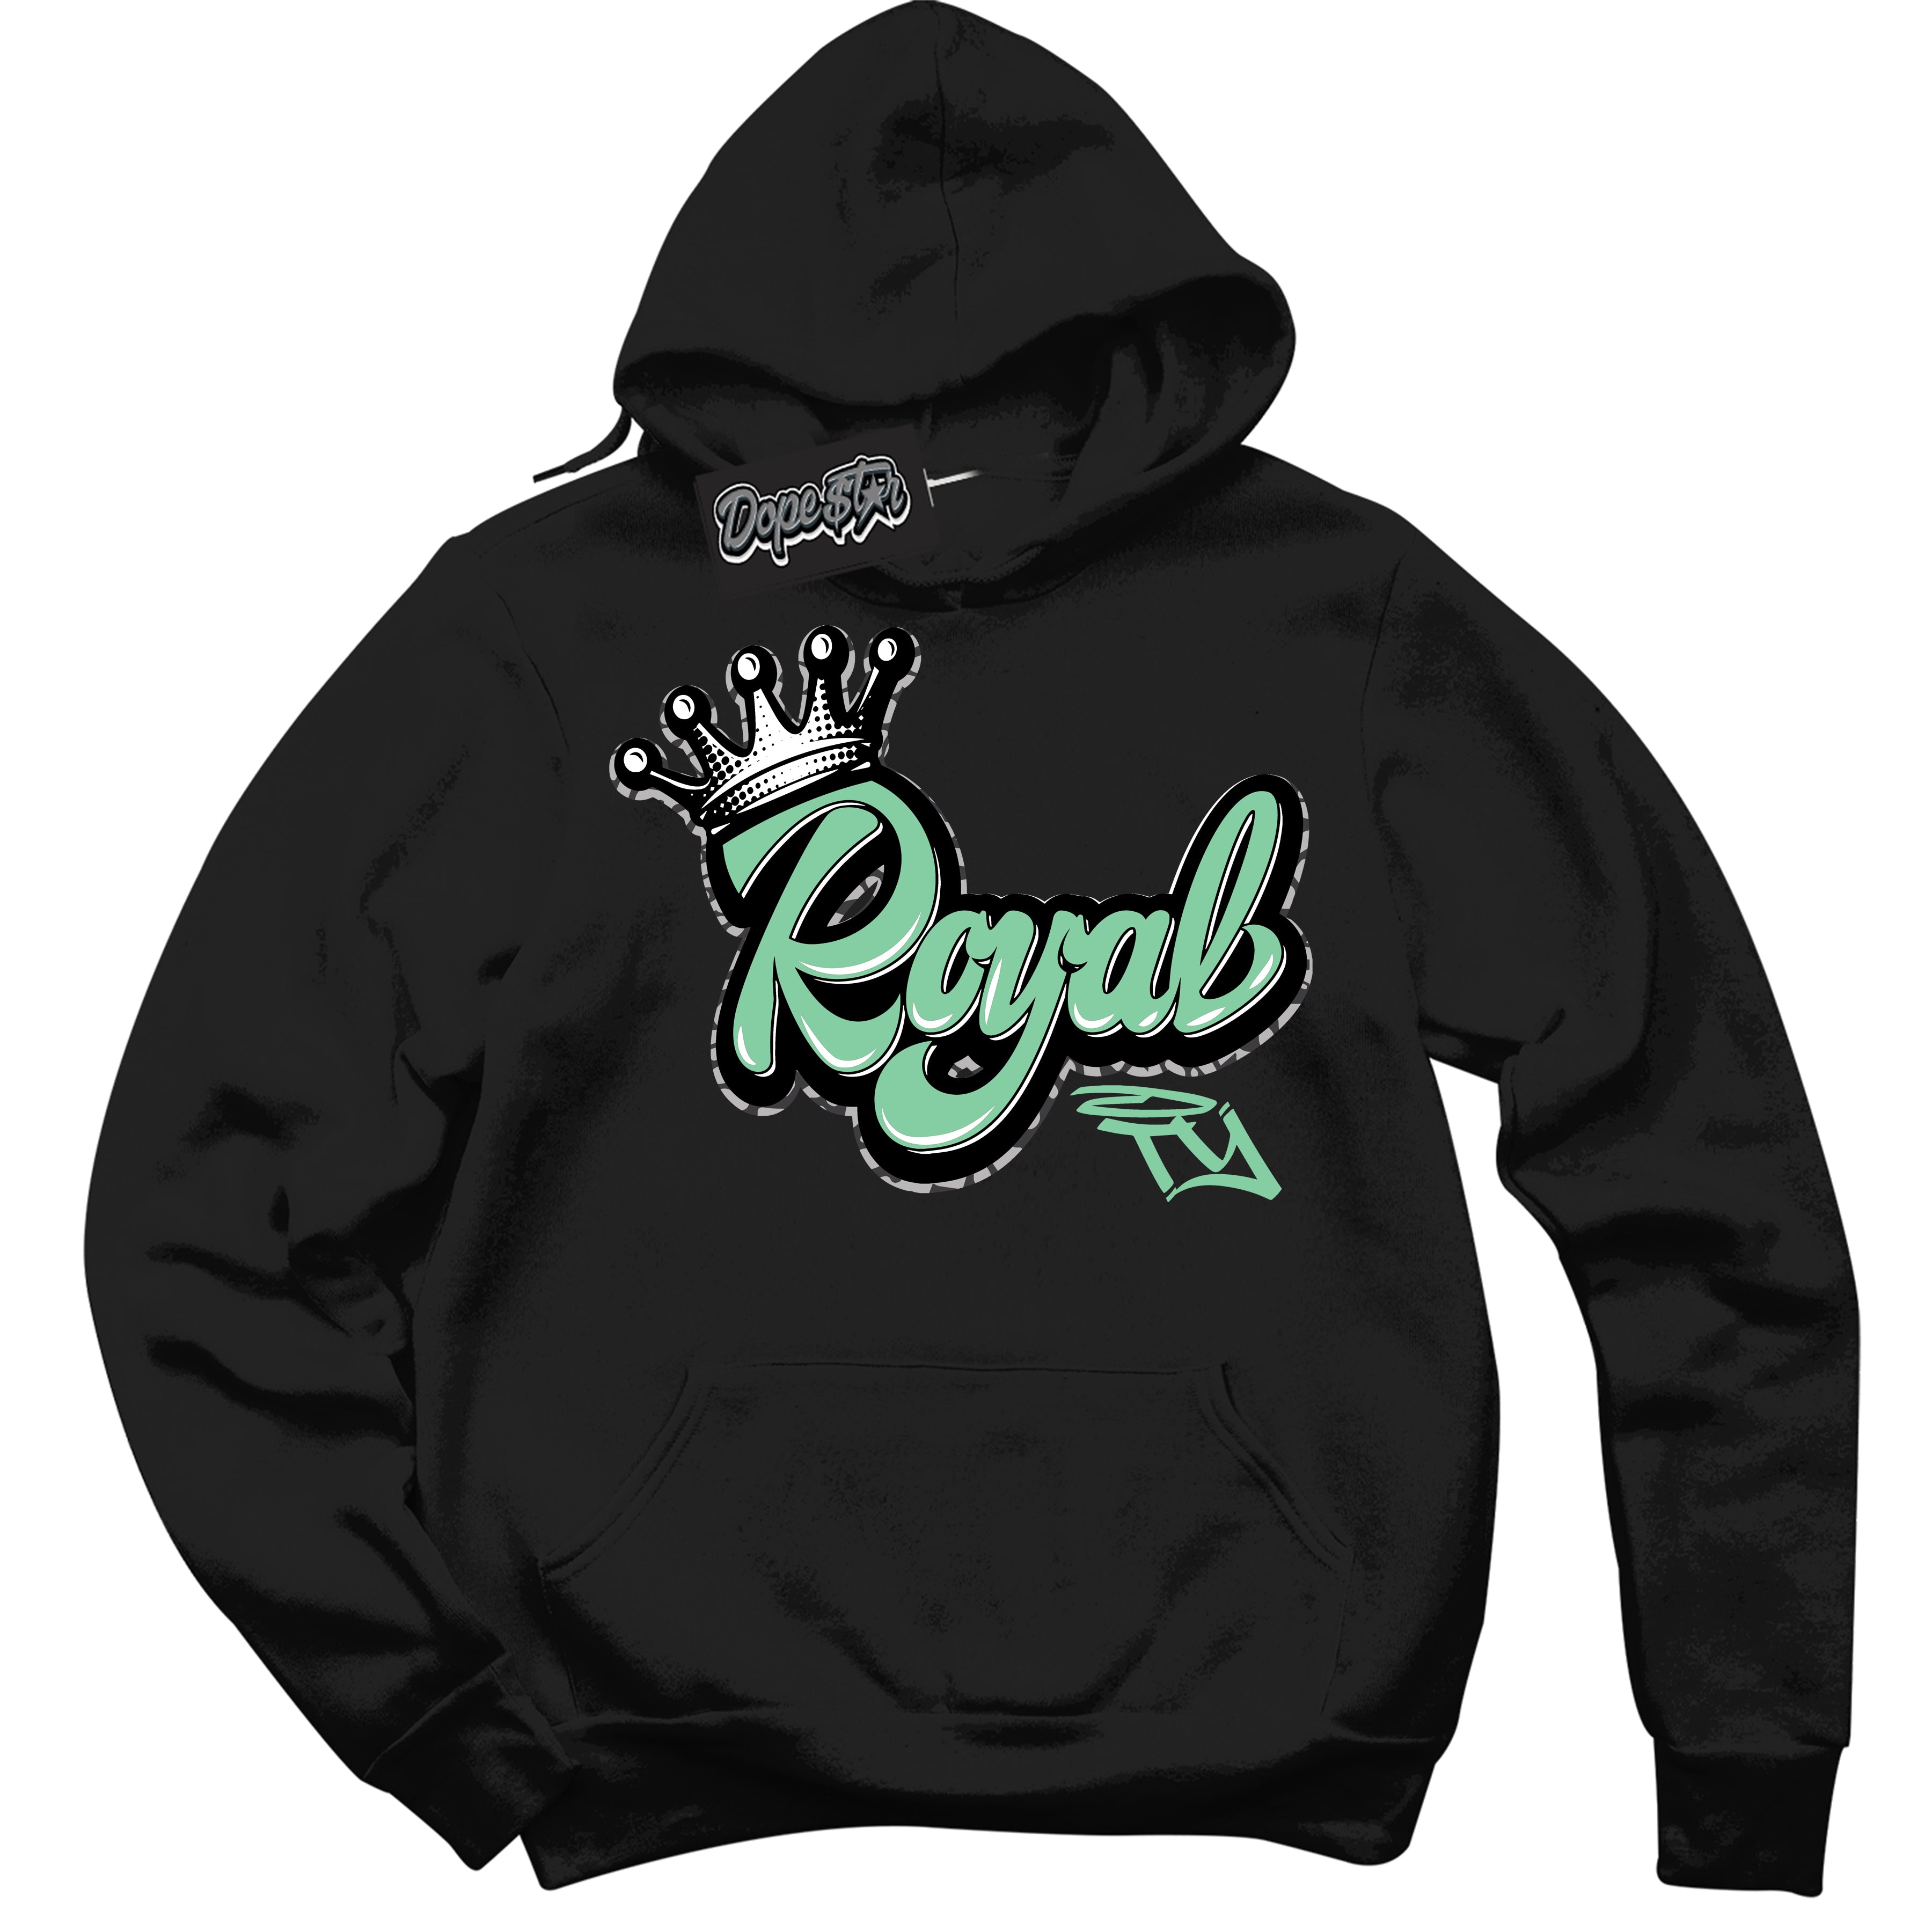 Cool Black Graphic DopeStar Hoodie with “ Royalty “ print, that perfectly matches Green Glow 3S sneakers